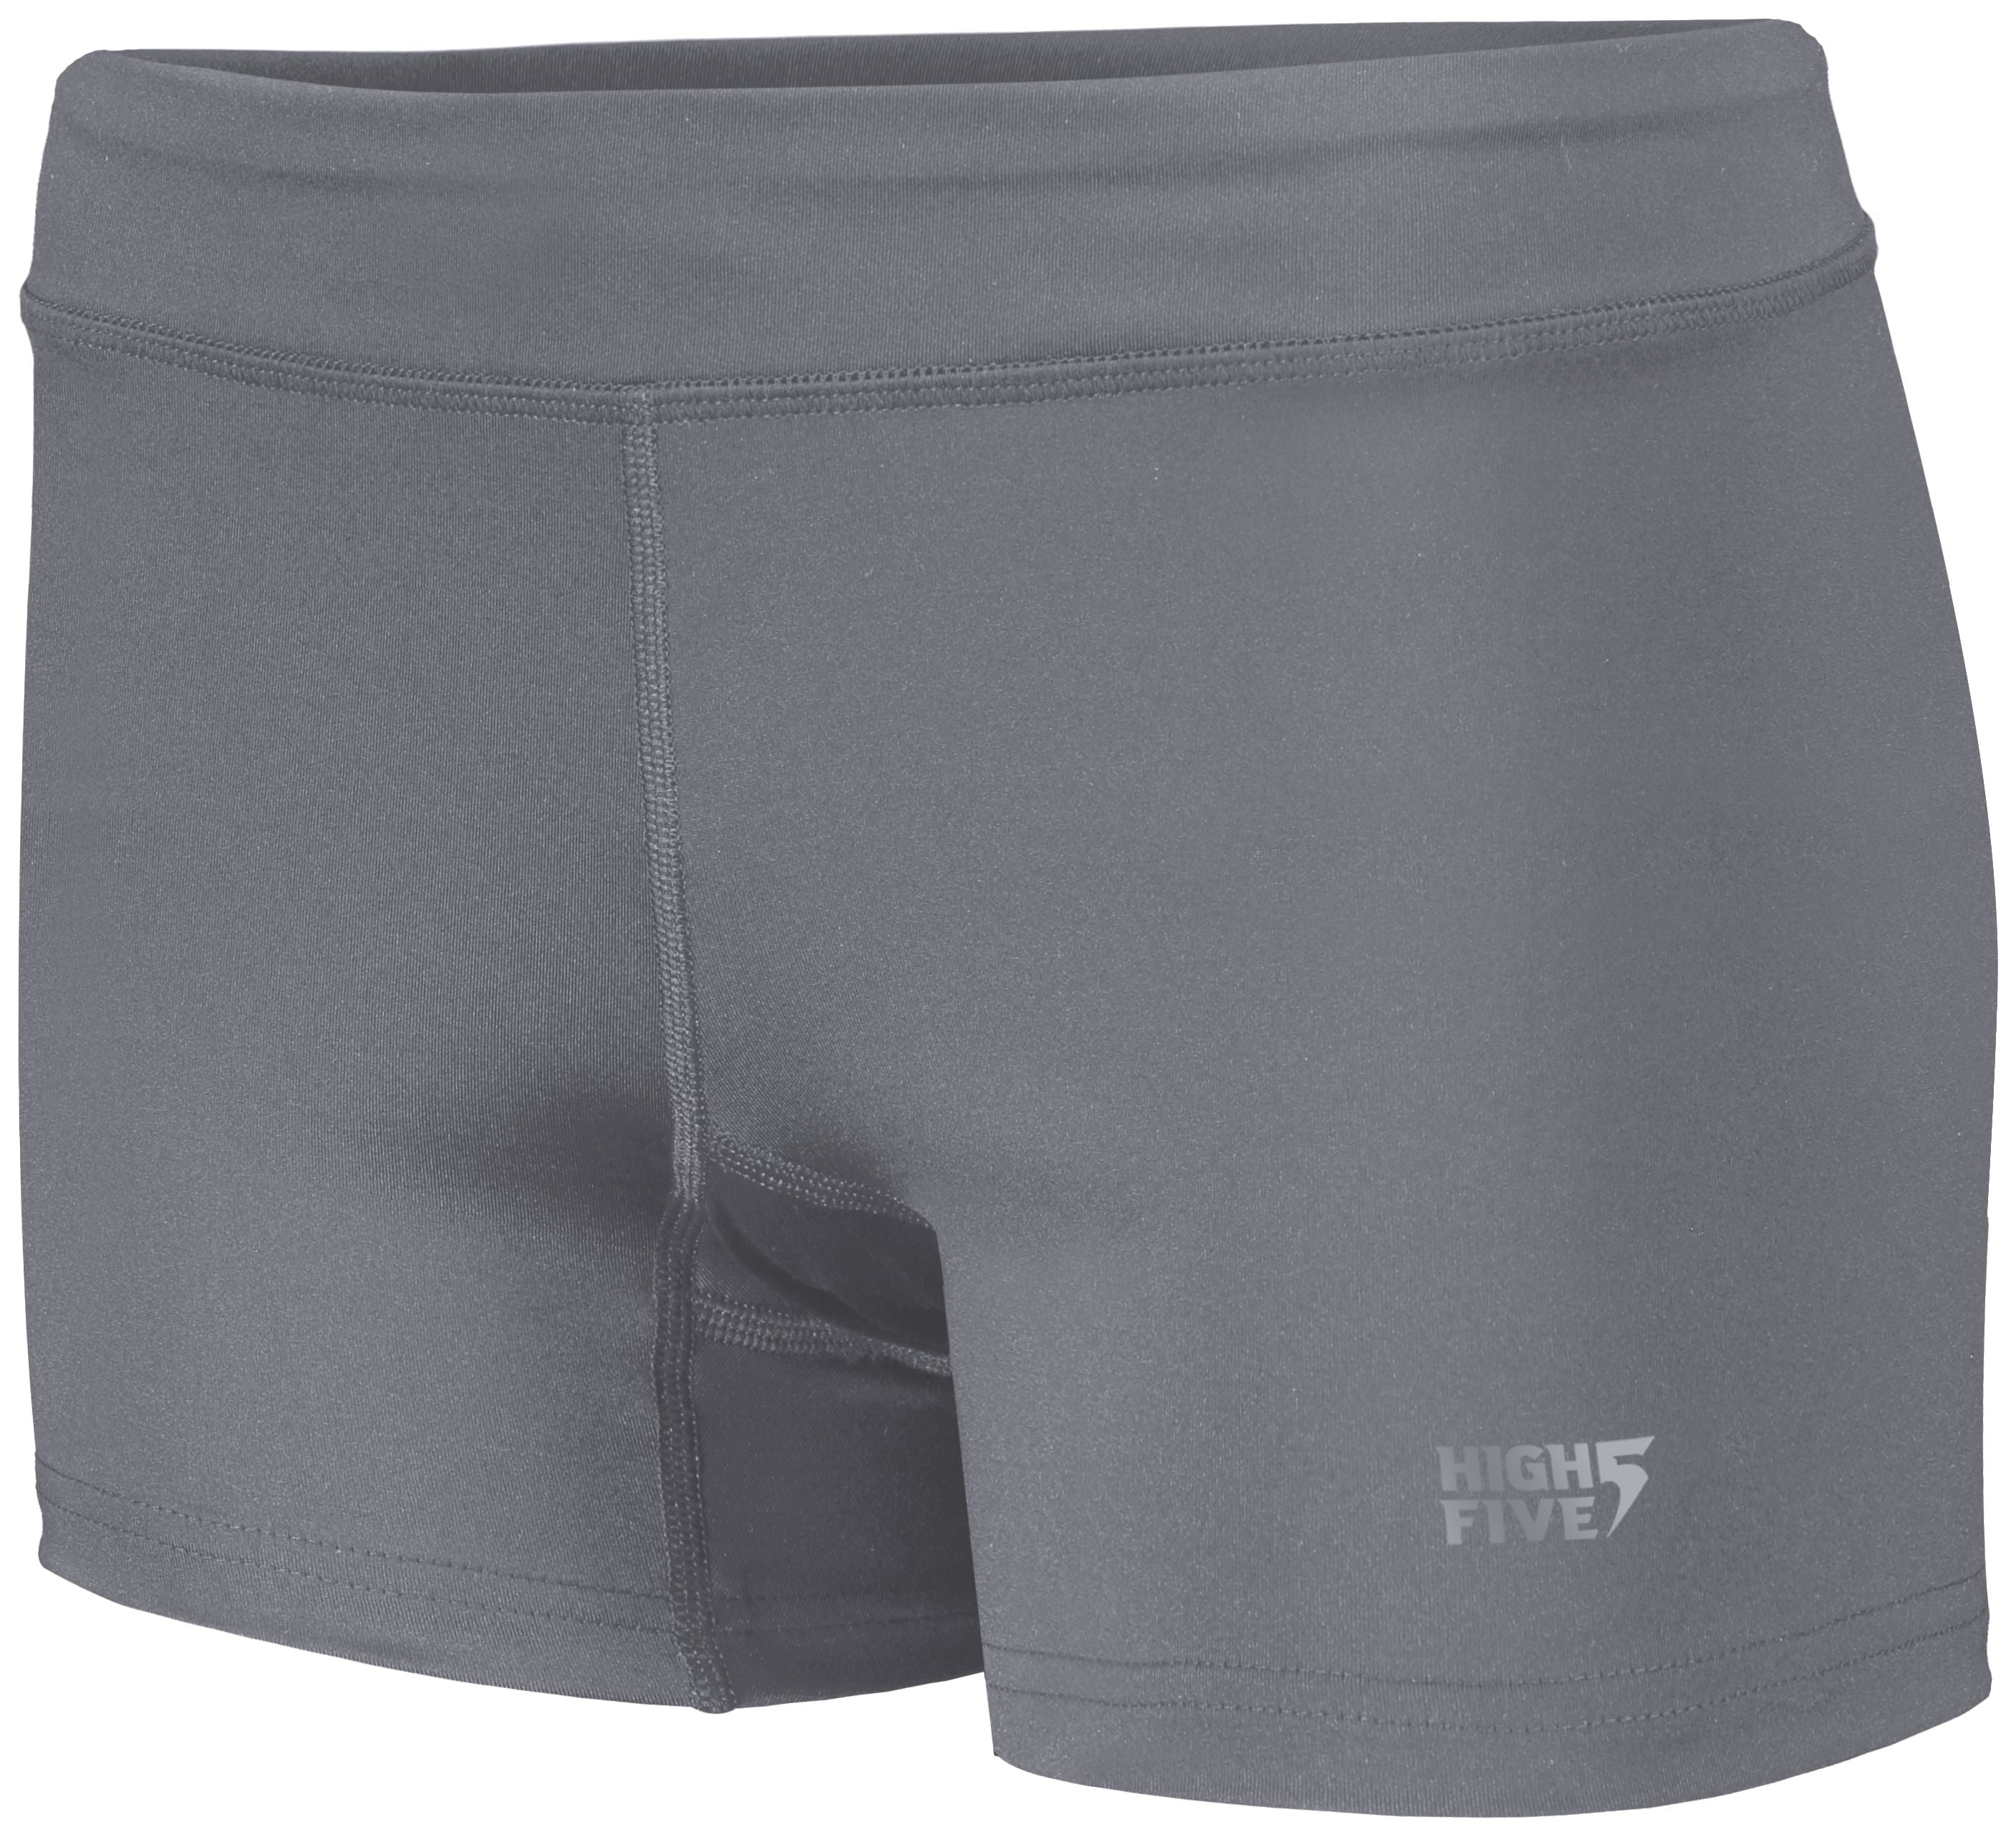 High 5 Ladies Truhit Volleyball Shorts in Graphite  -Part of the Ladies, Ladies-Shorts, High5-Products, Volleyball product lines at KanaleyCreations.com